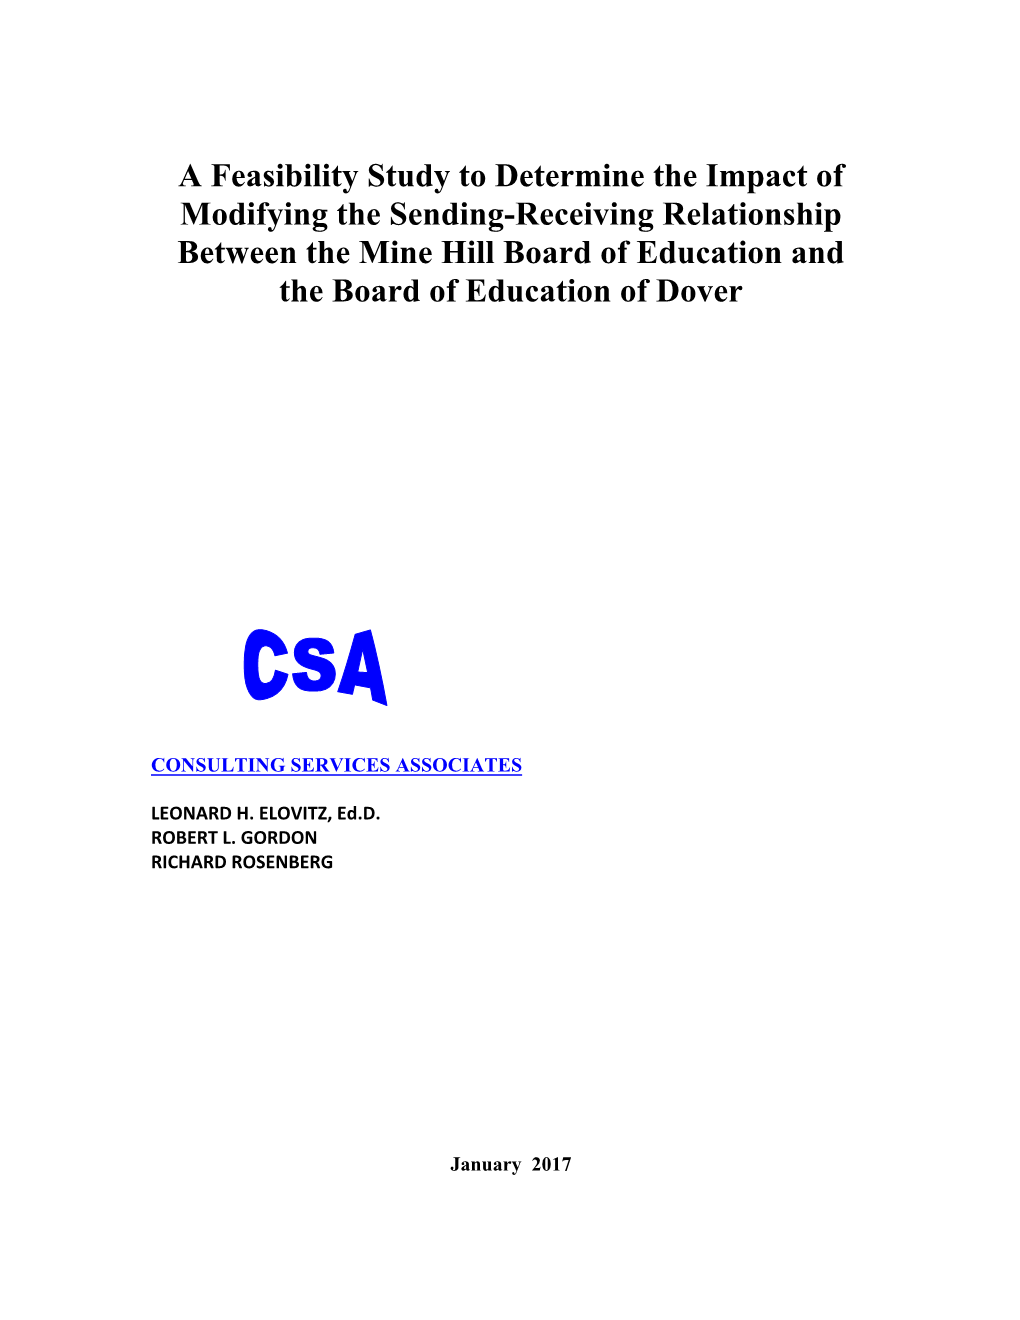 A Feasibility Study to Determine the Impact Of